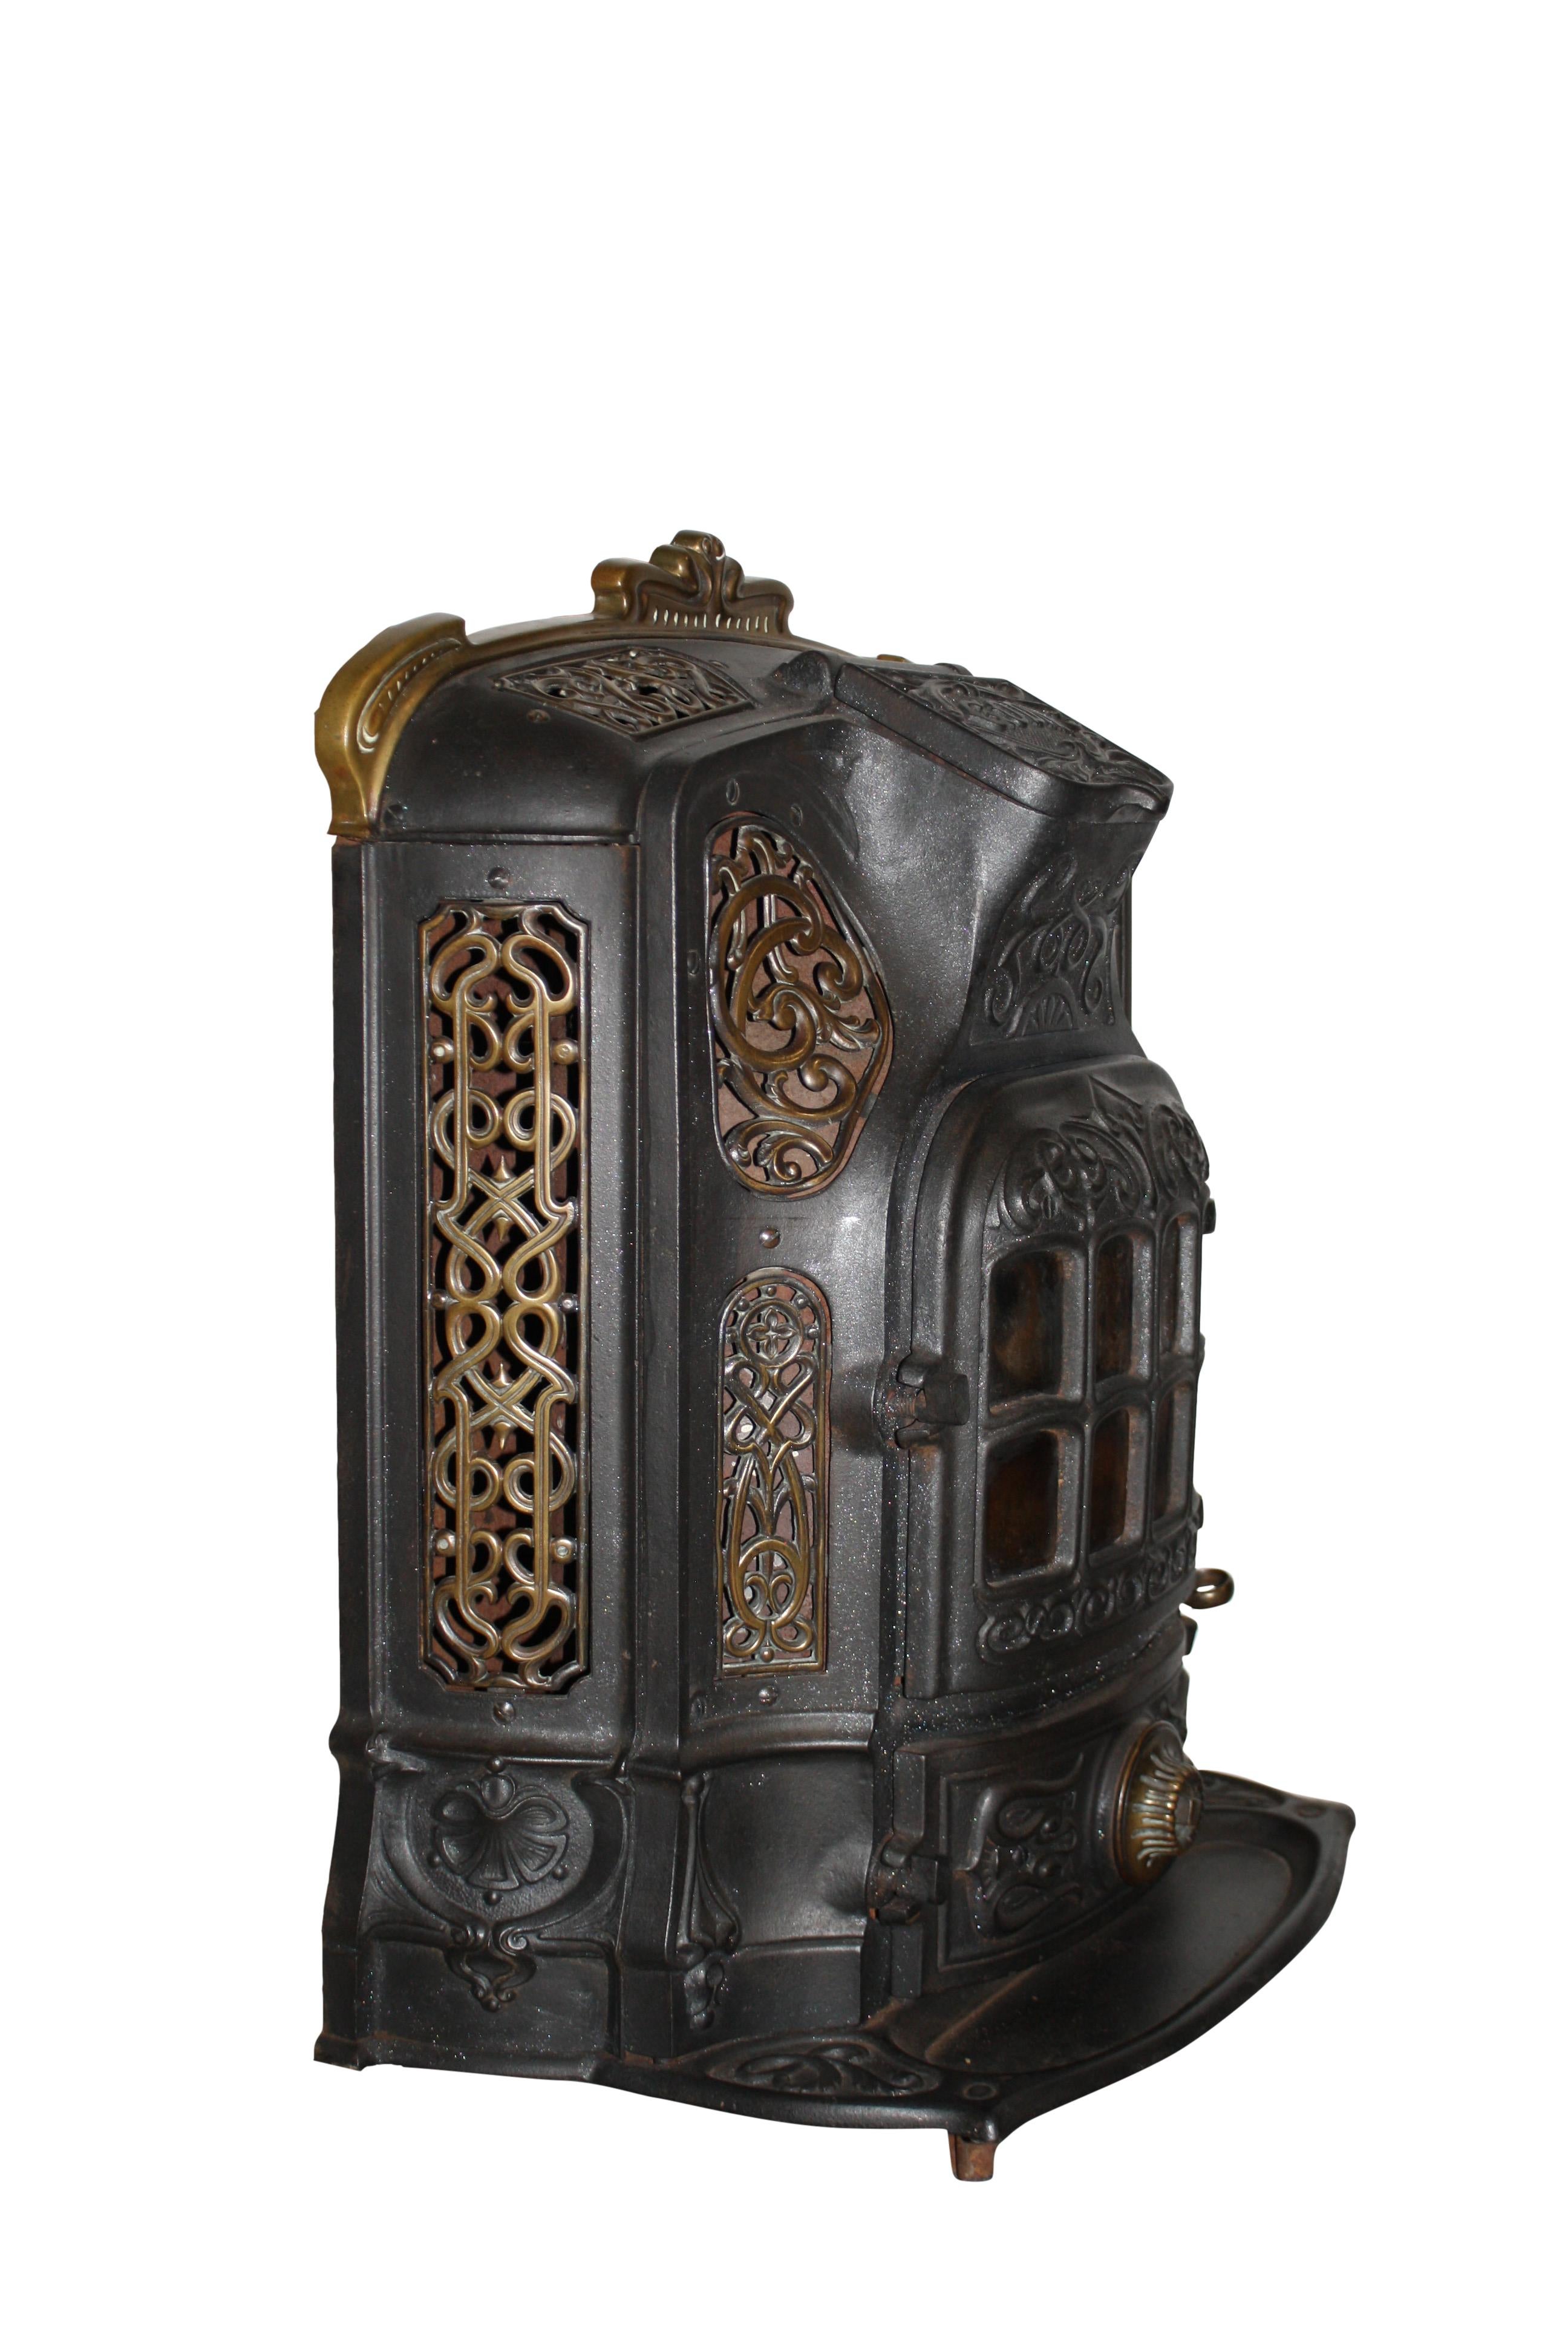 Made in France by the Godin Company, this beauty is a freestanding, multi-fuel, cast iron stove with brass accents and an eight pane, arched door. Godin has been manufacturing stoves in France since 1840. The stove has not been tested.